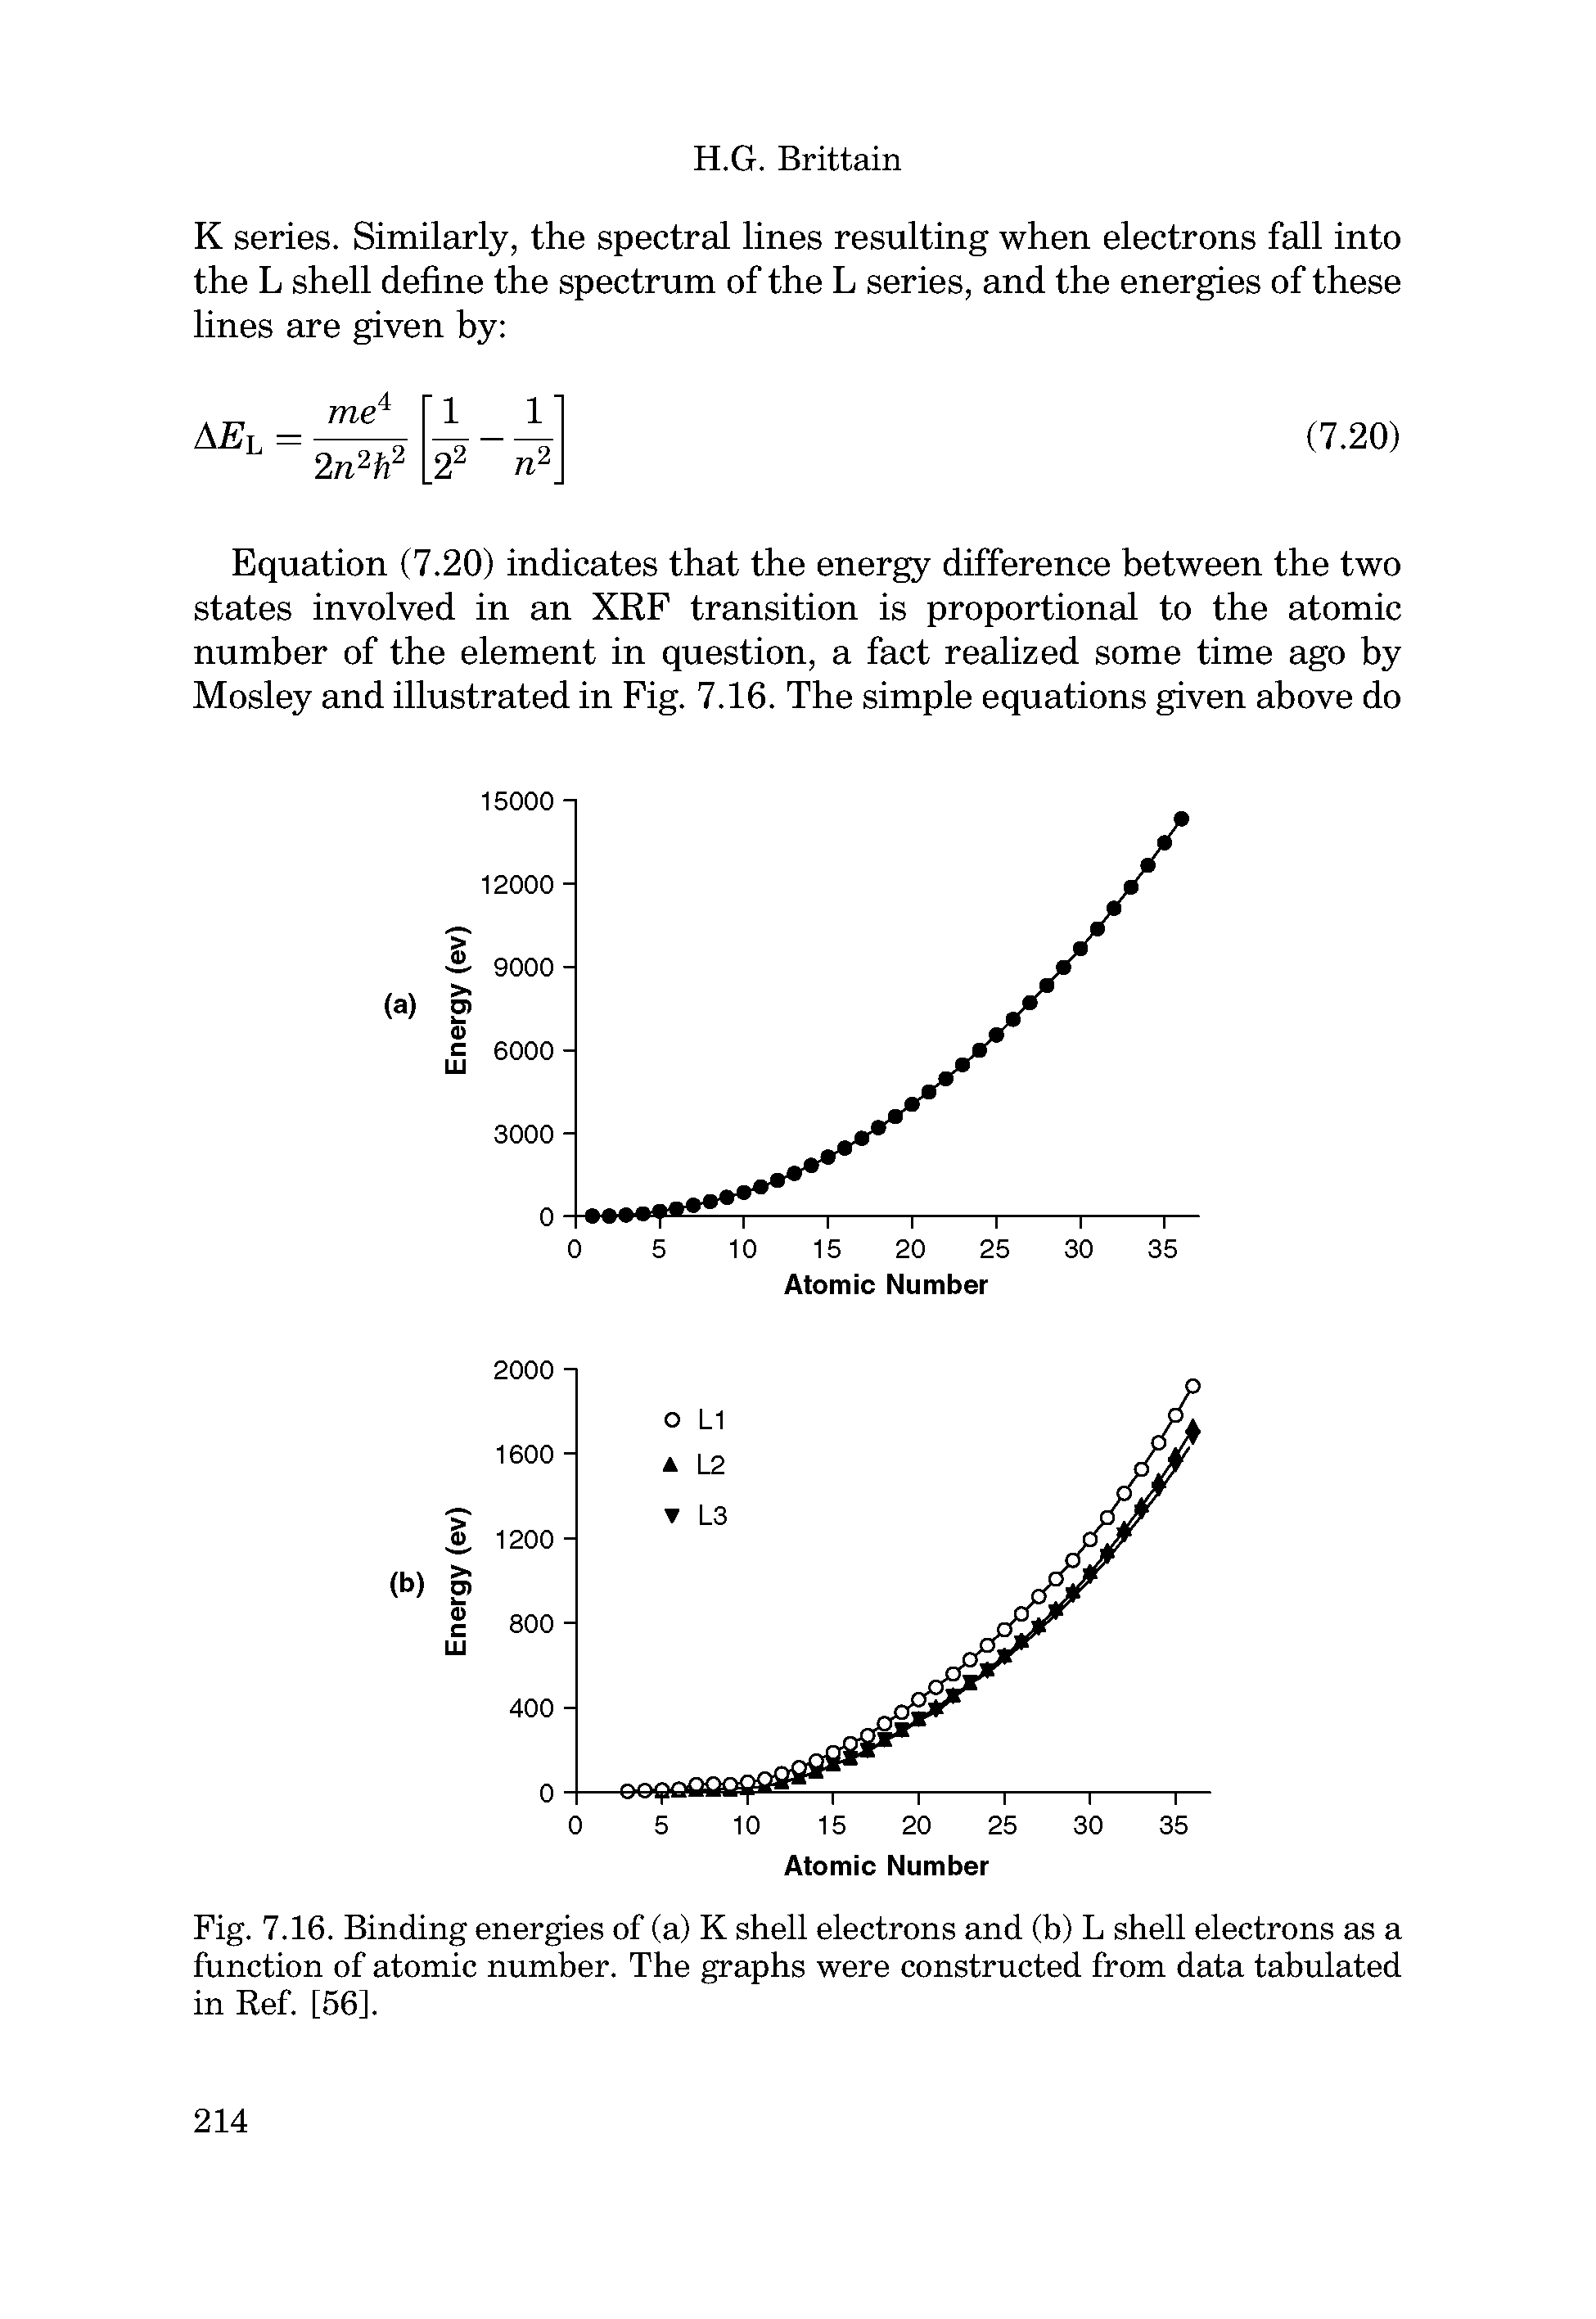 Fig. 7.16. Binding energies of (a) K shell electrons and (b) L shell electrons as a function of atomic number. The graphs were constructed from data tabulated in Ref. [56].